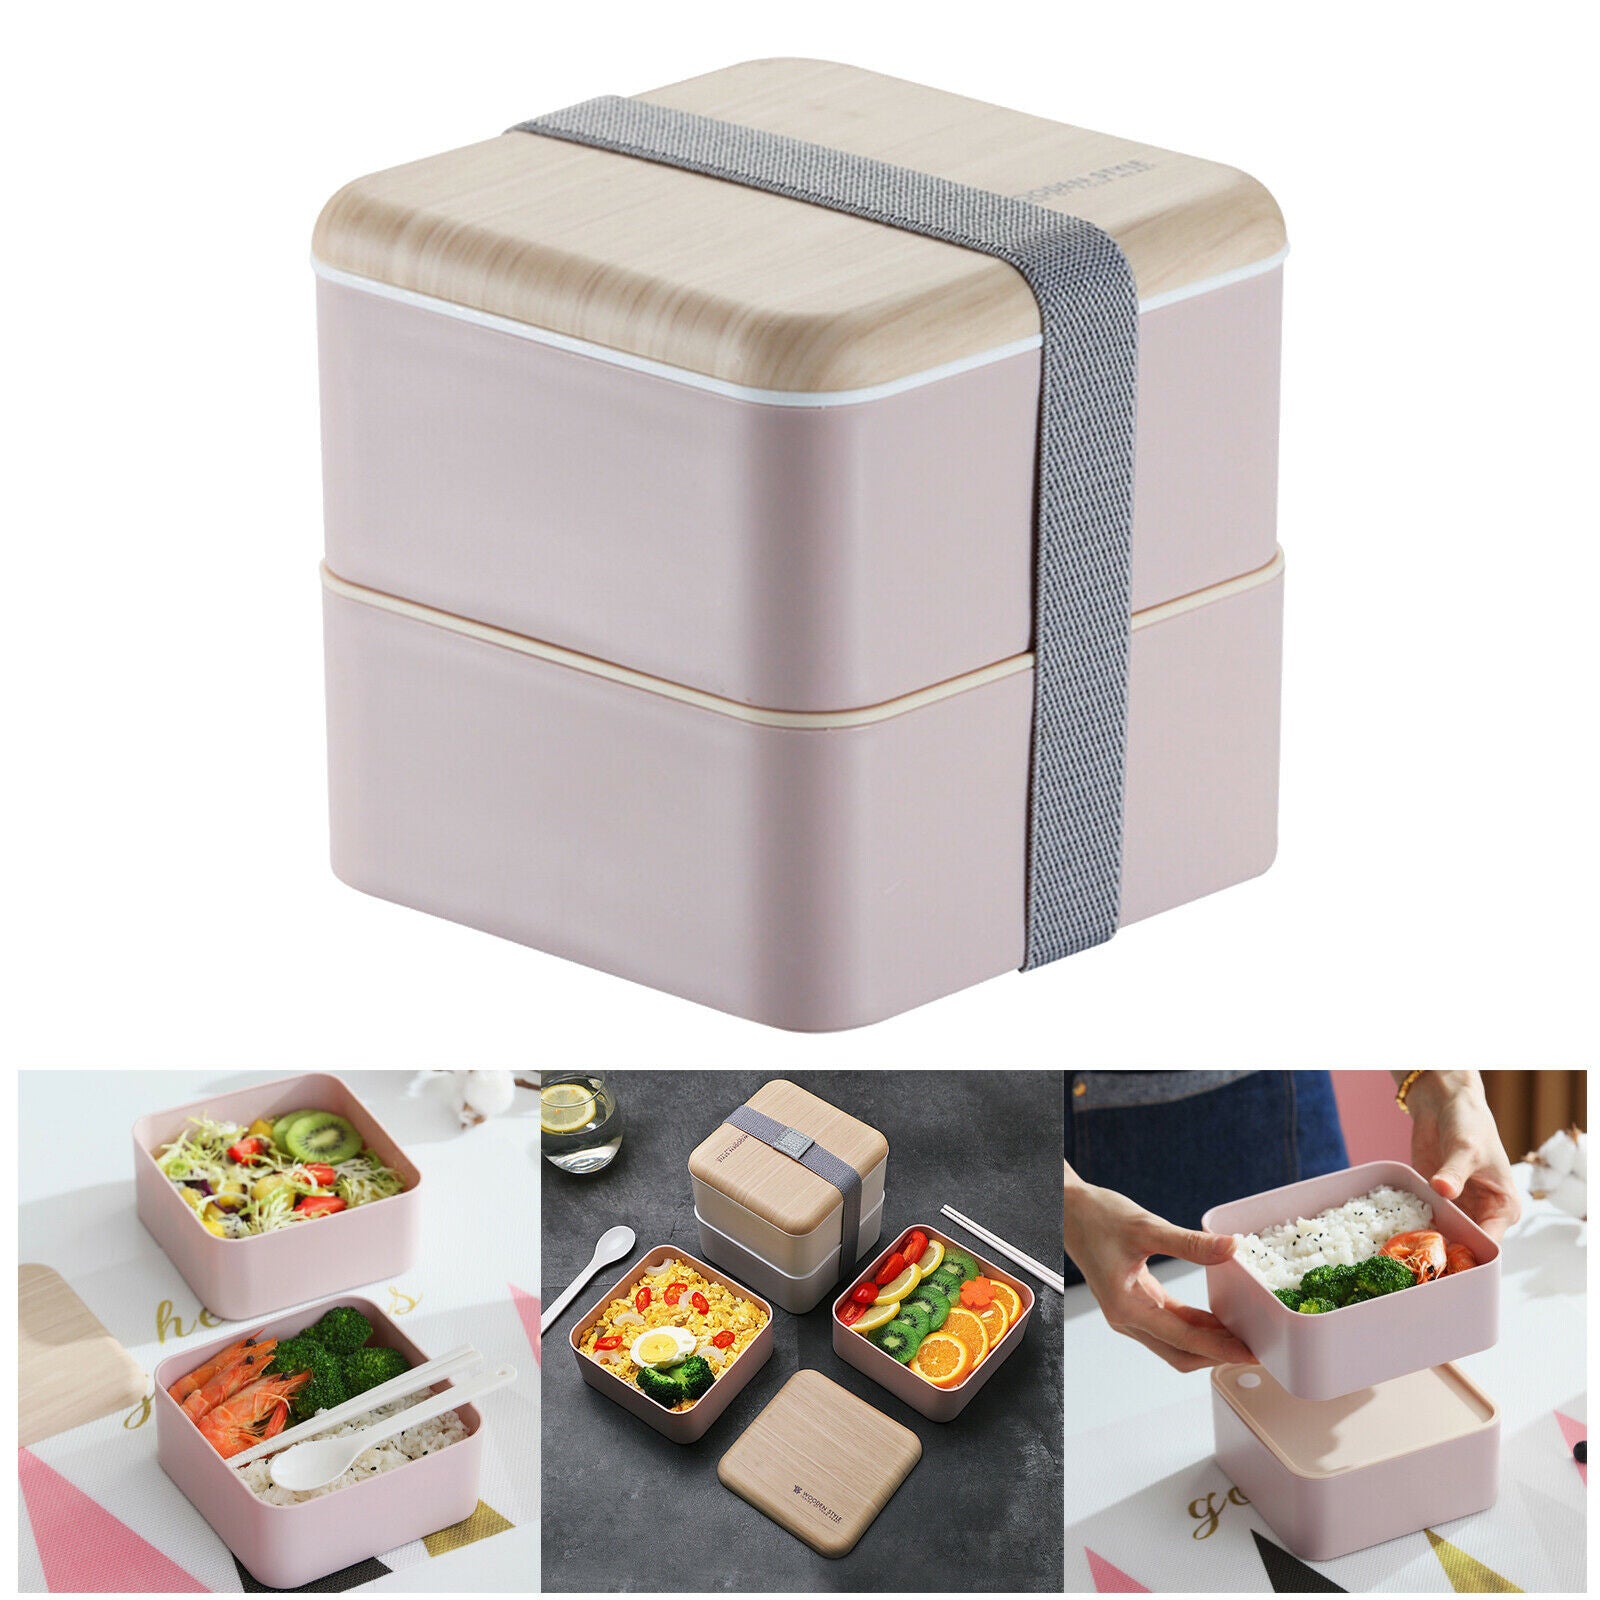 Lunch Box Flatware Included Meal Prep Containers for Office Worker Kids